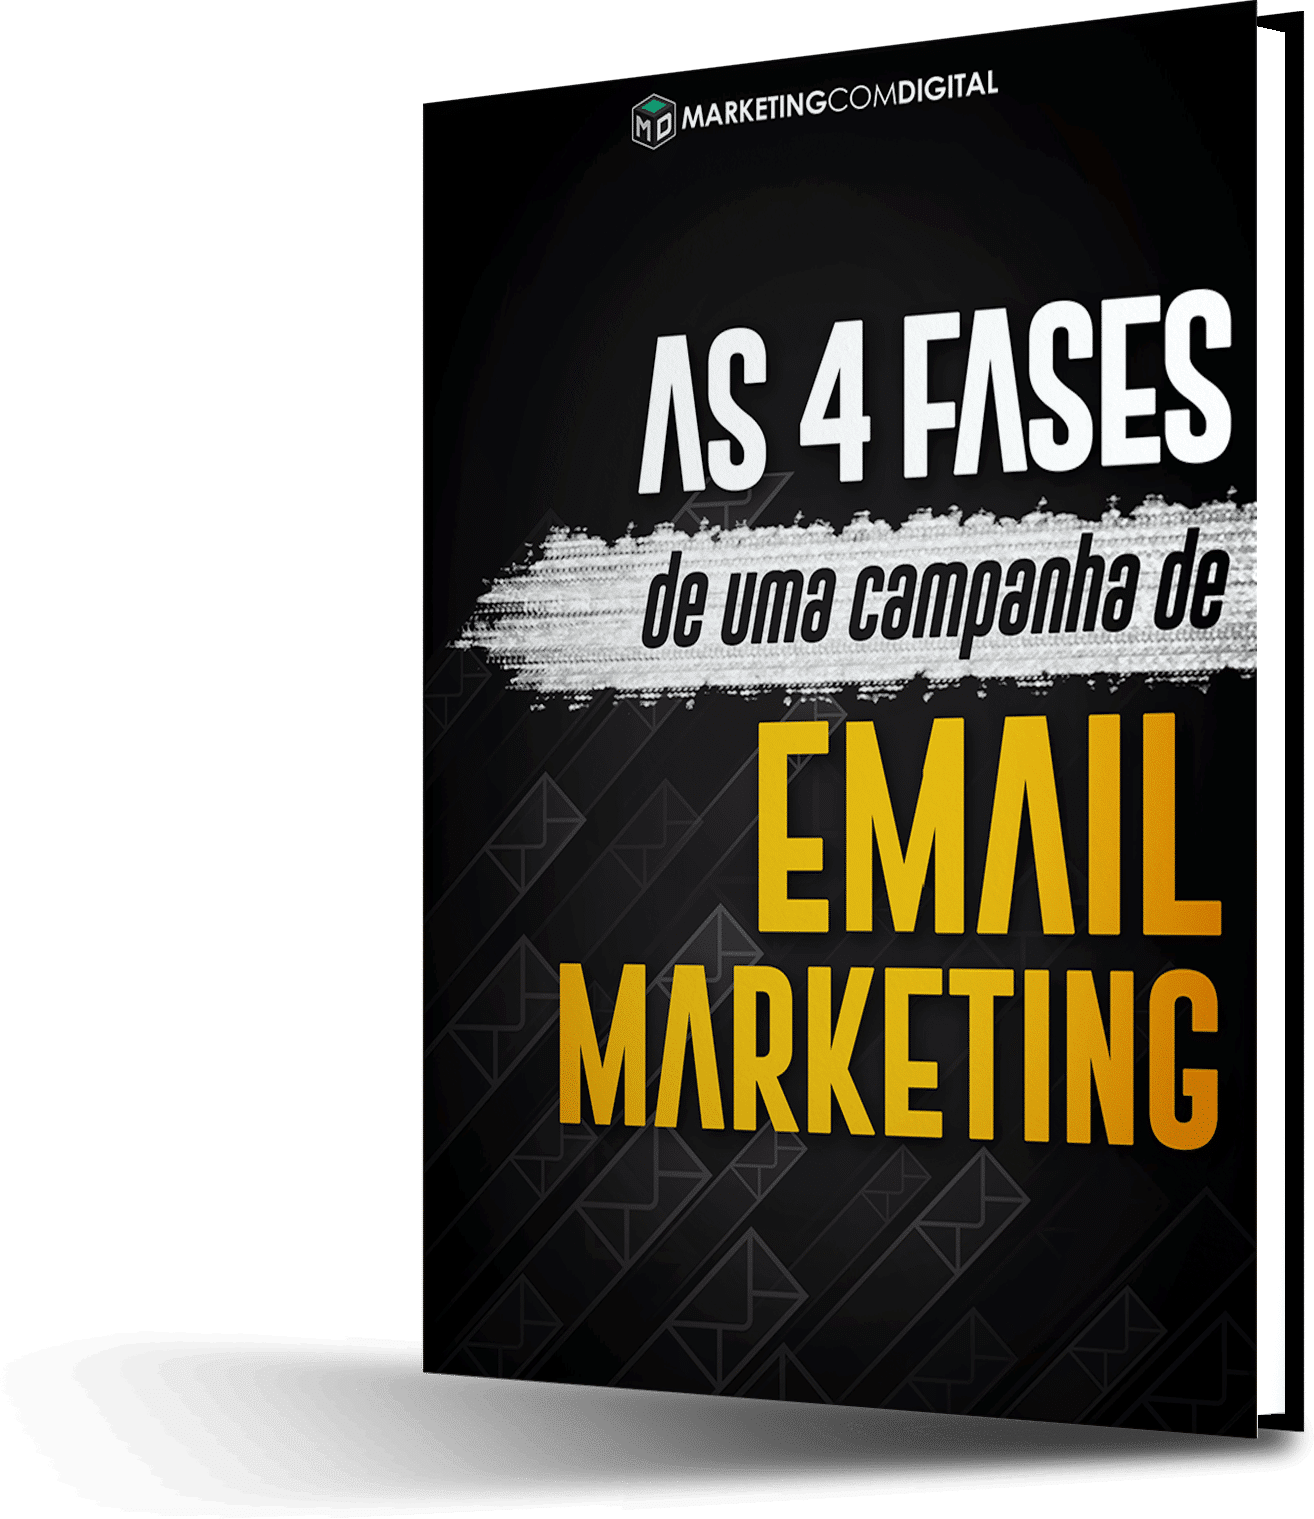 4 fases ebook - 4 Fases do Email Marketing